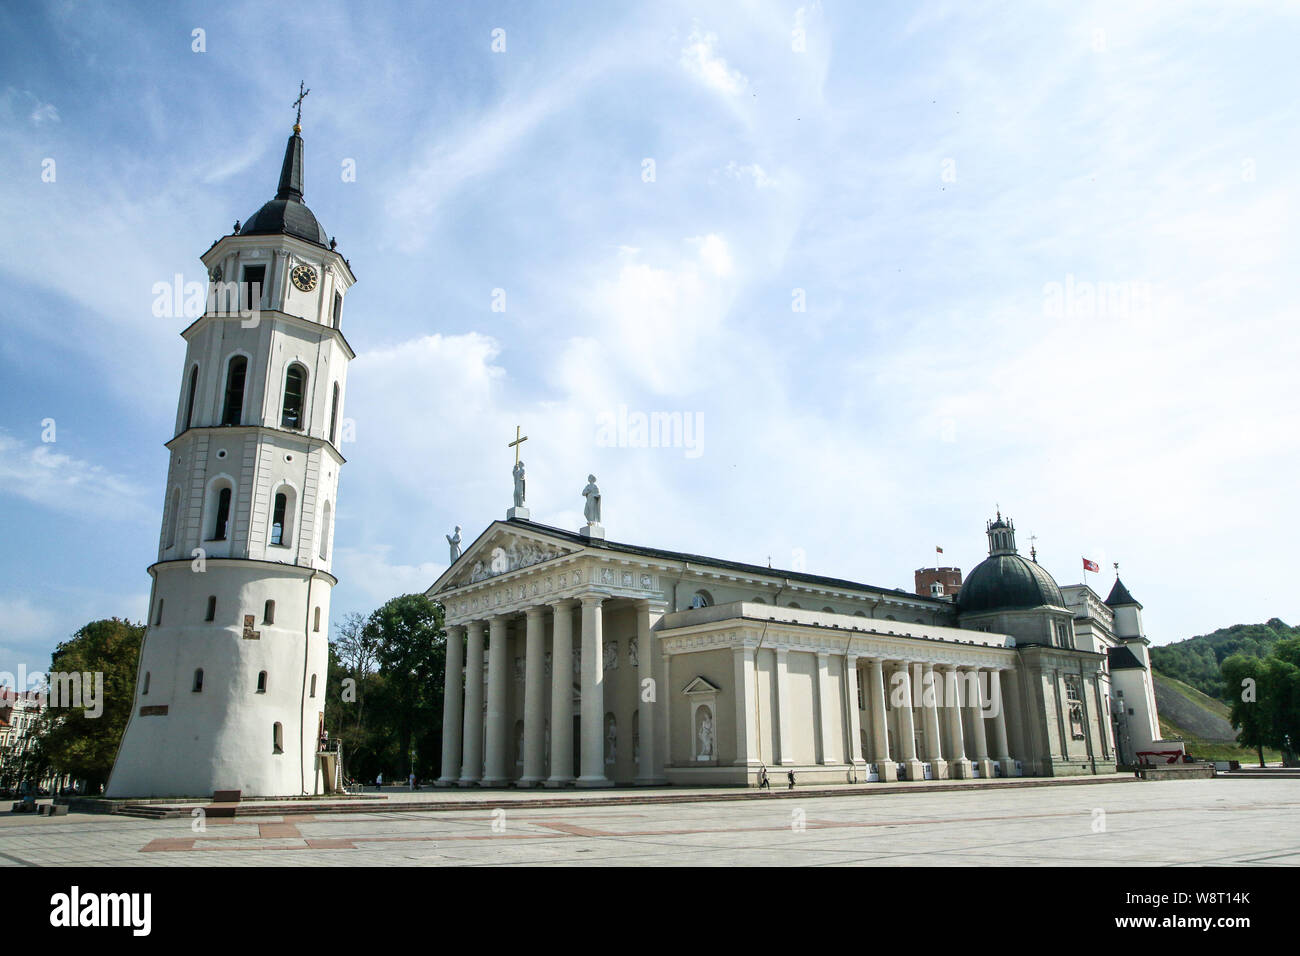 The "Vilniaus katedra", the Vilnius cathedral in Lithuania. One of the main sights of the country. Stock Photo